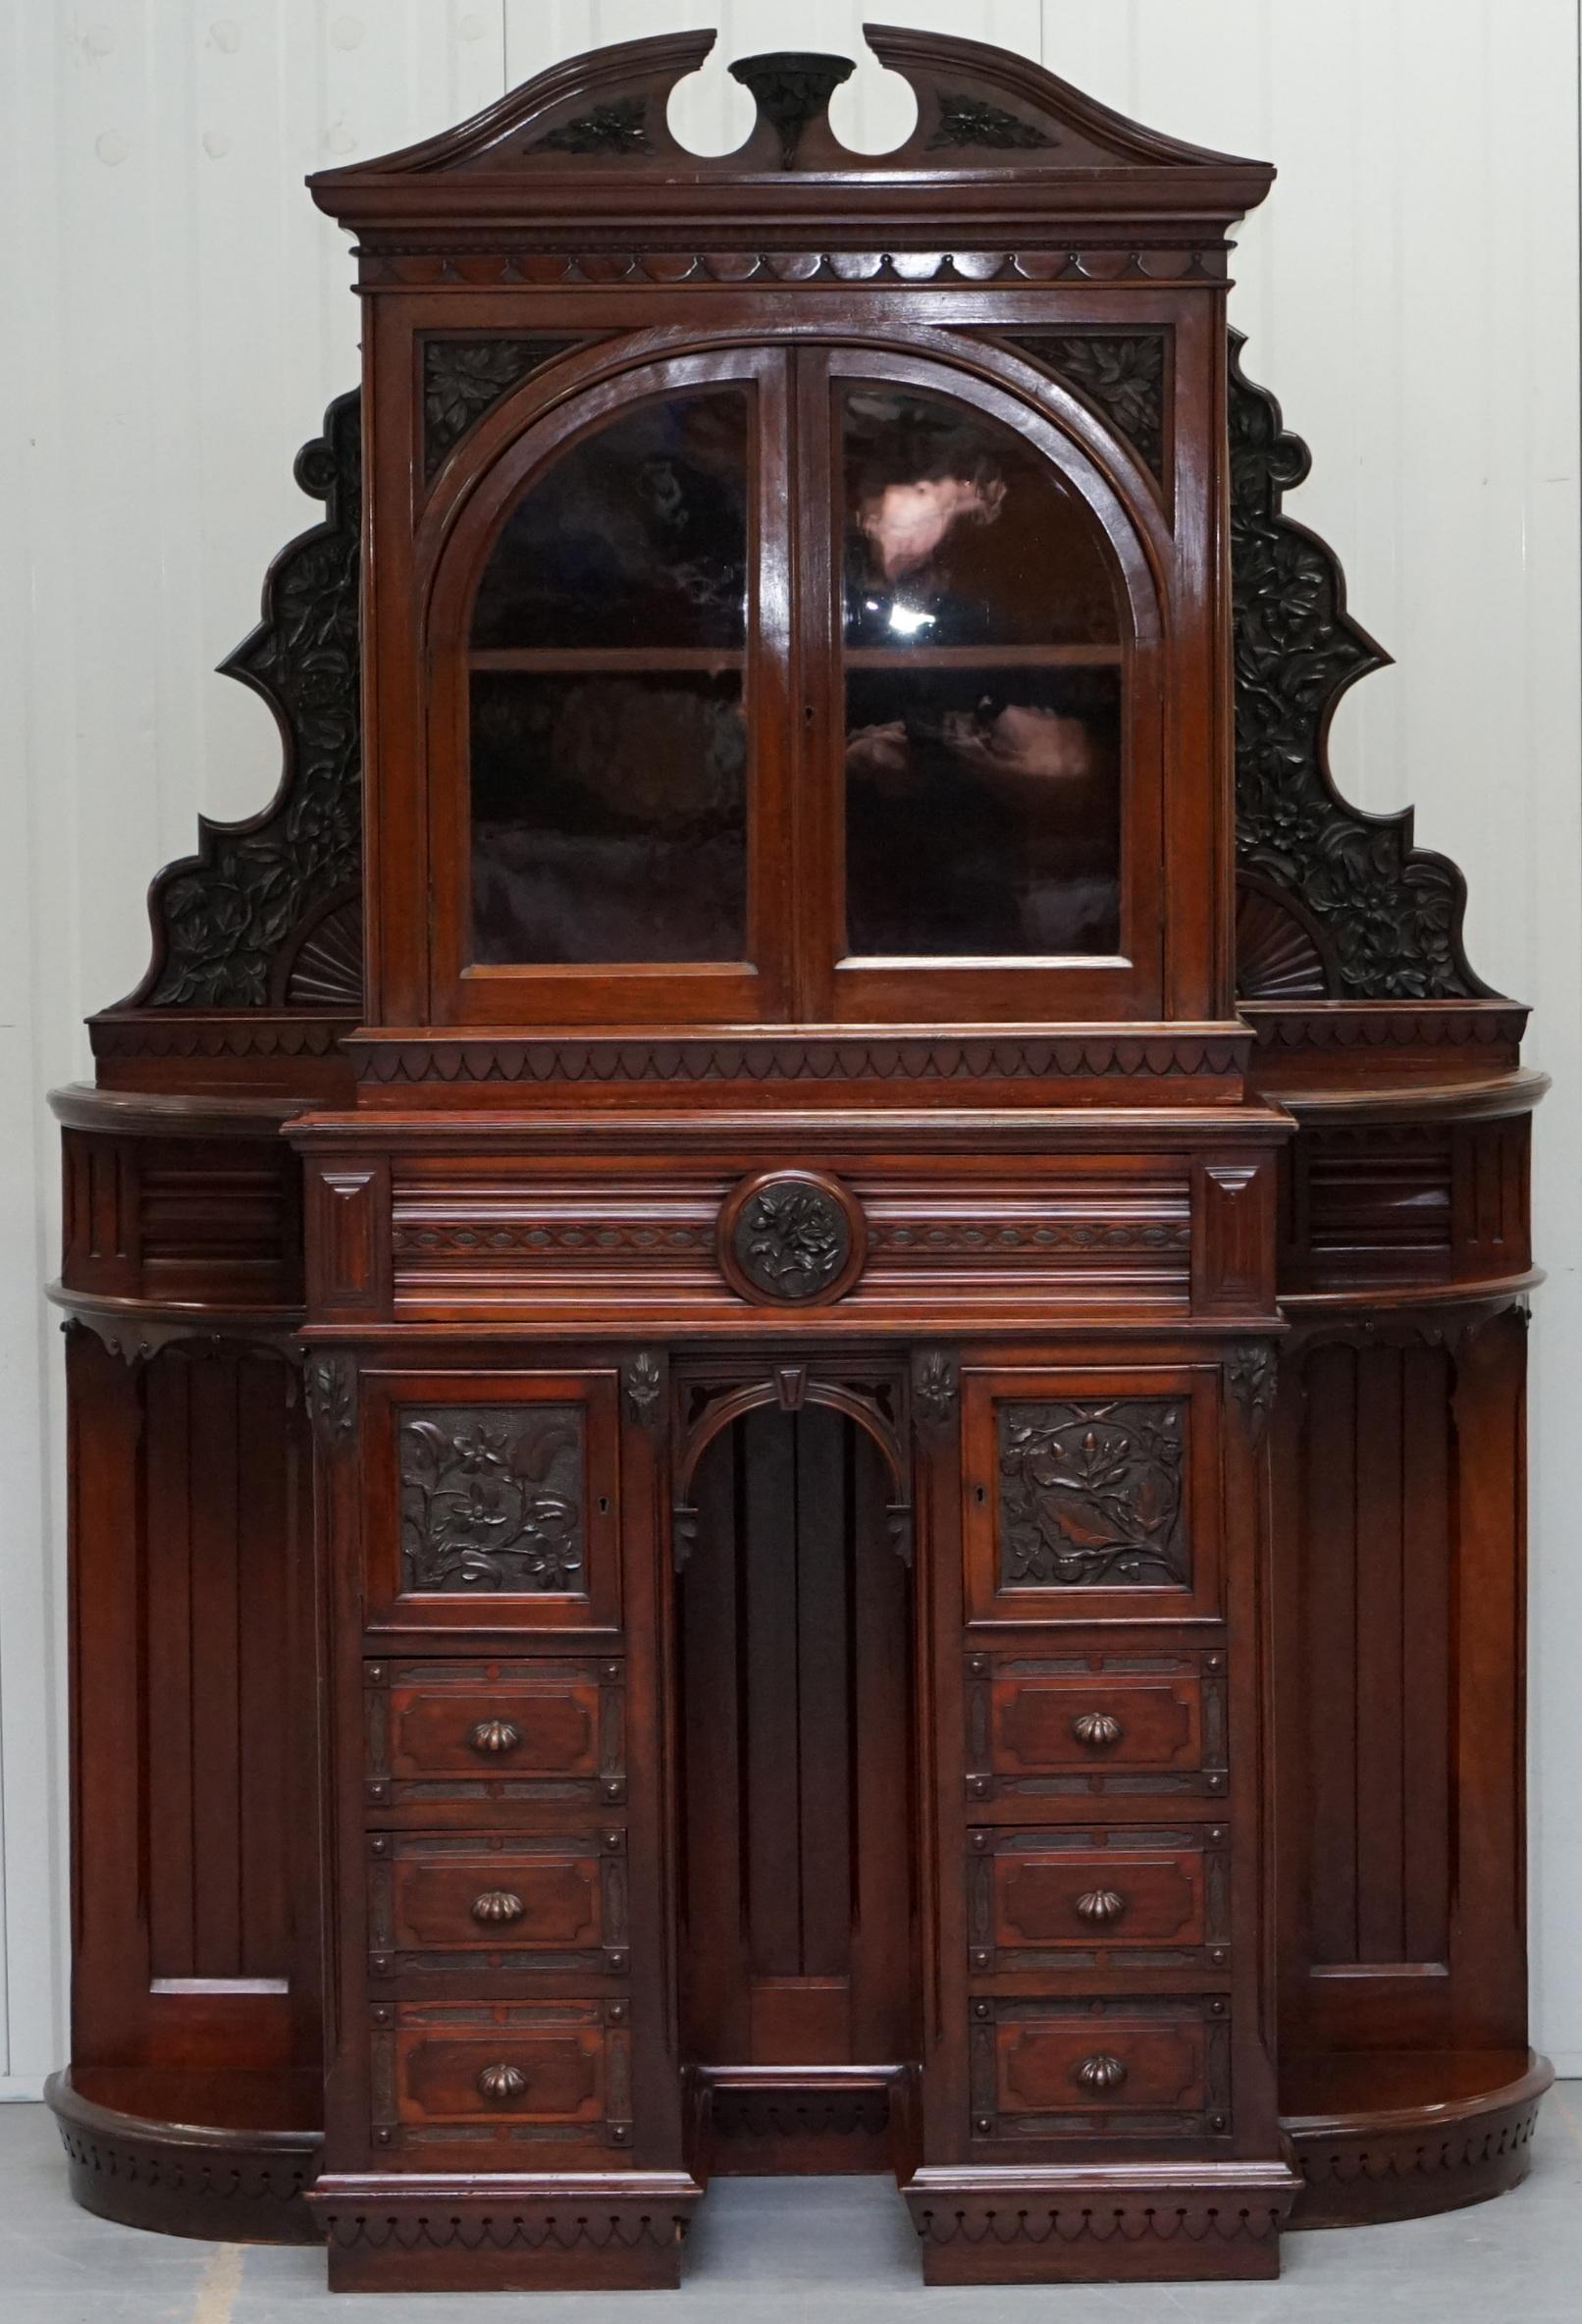 We are delighted to offer for sale this stunning early Victorian solid Walnut hand carved side cabinet cupboard with drawers

A very grand little cabinet, I say little, it is 188cm tall but some of these pieces in the Victoria era were monstrously